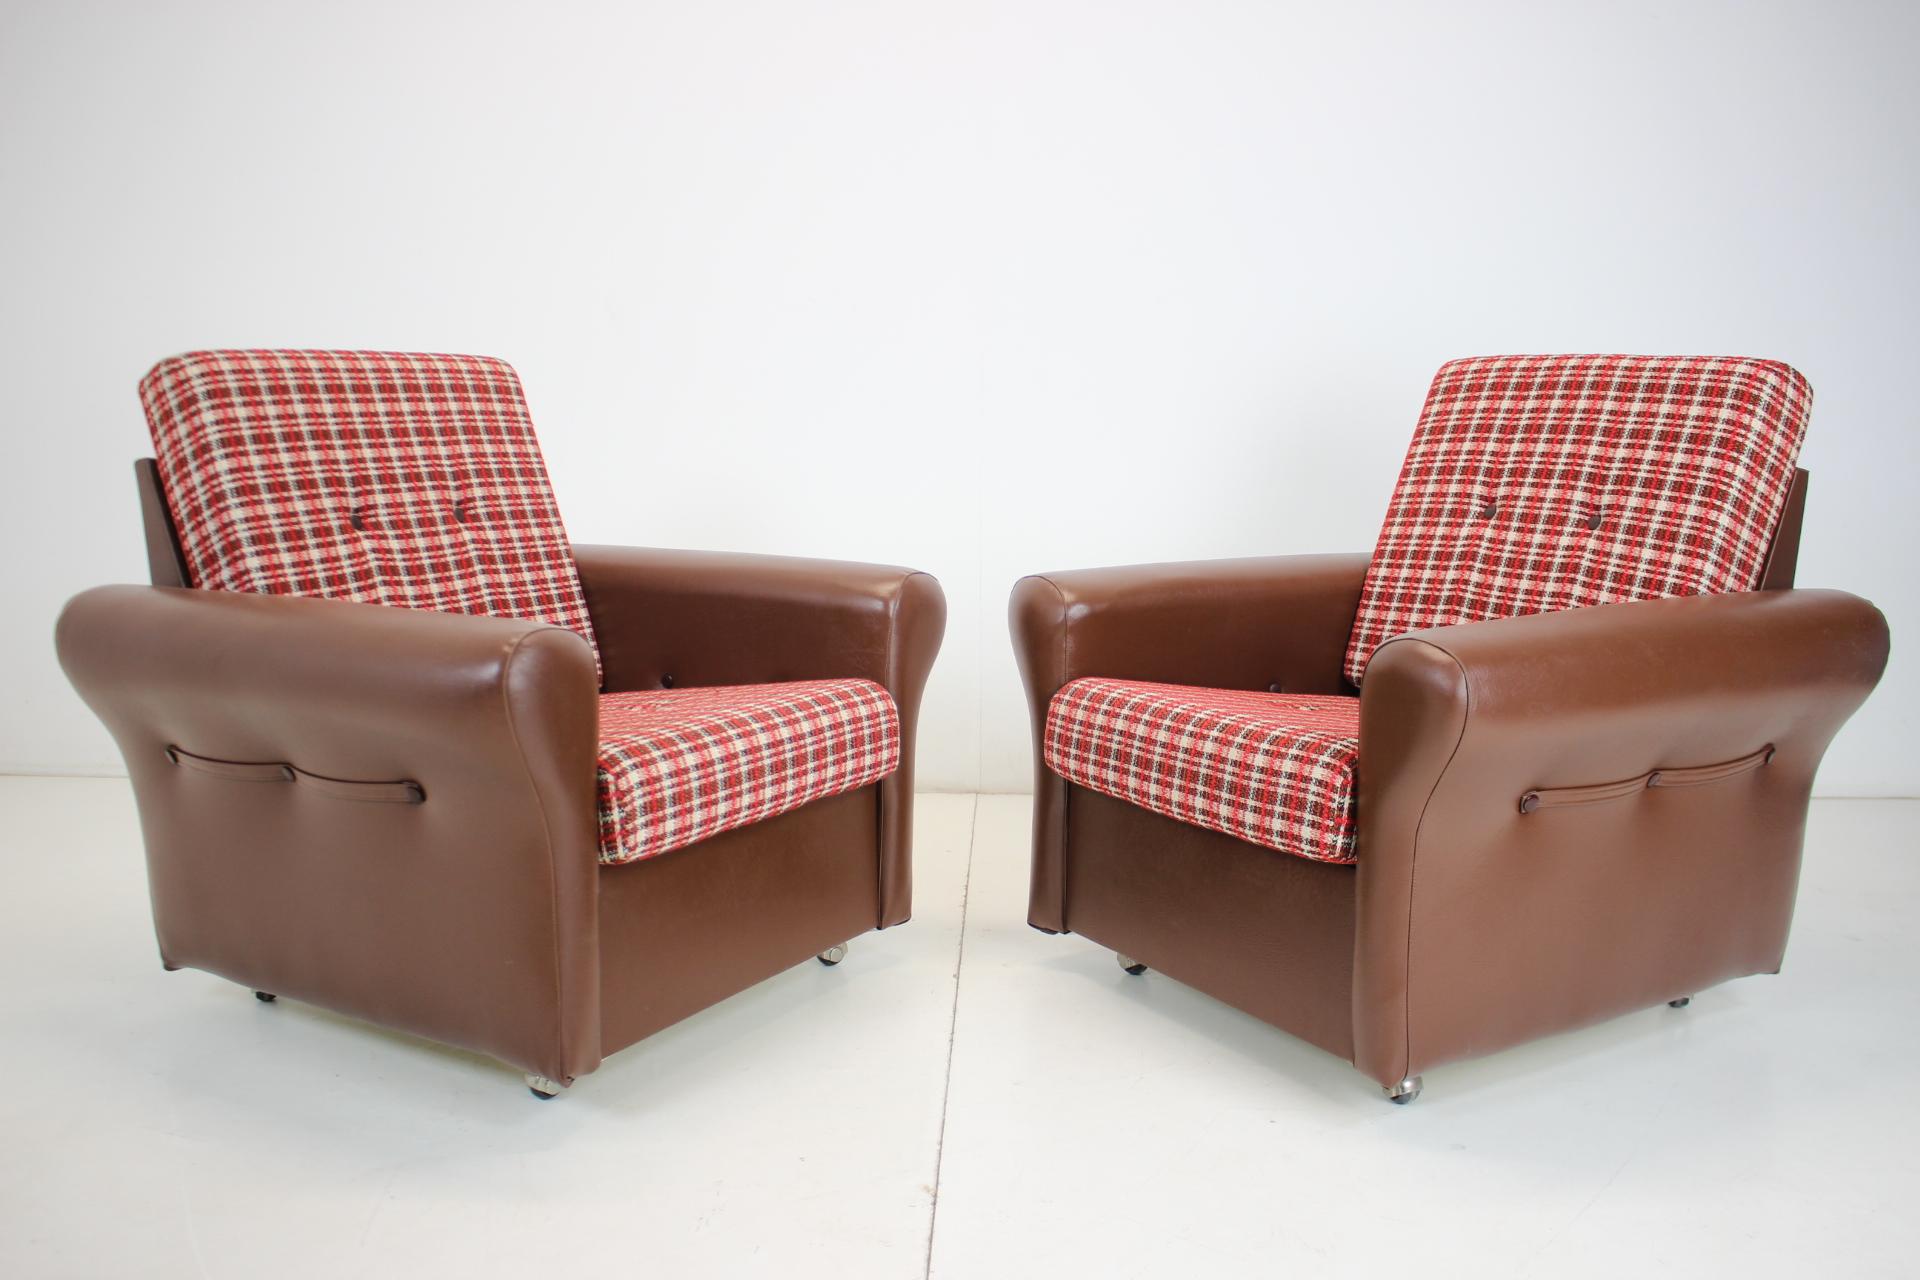 Made of Fabric, Leatherette
Each armchair has four swivel wheels,which makes it easy to move them around.
The leatherette is worn out in places,see foto
You can also buy one pieces
Original condition.